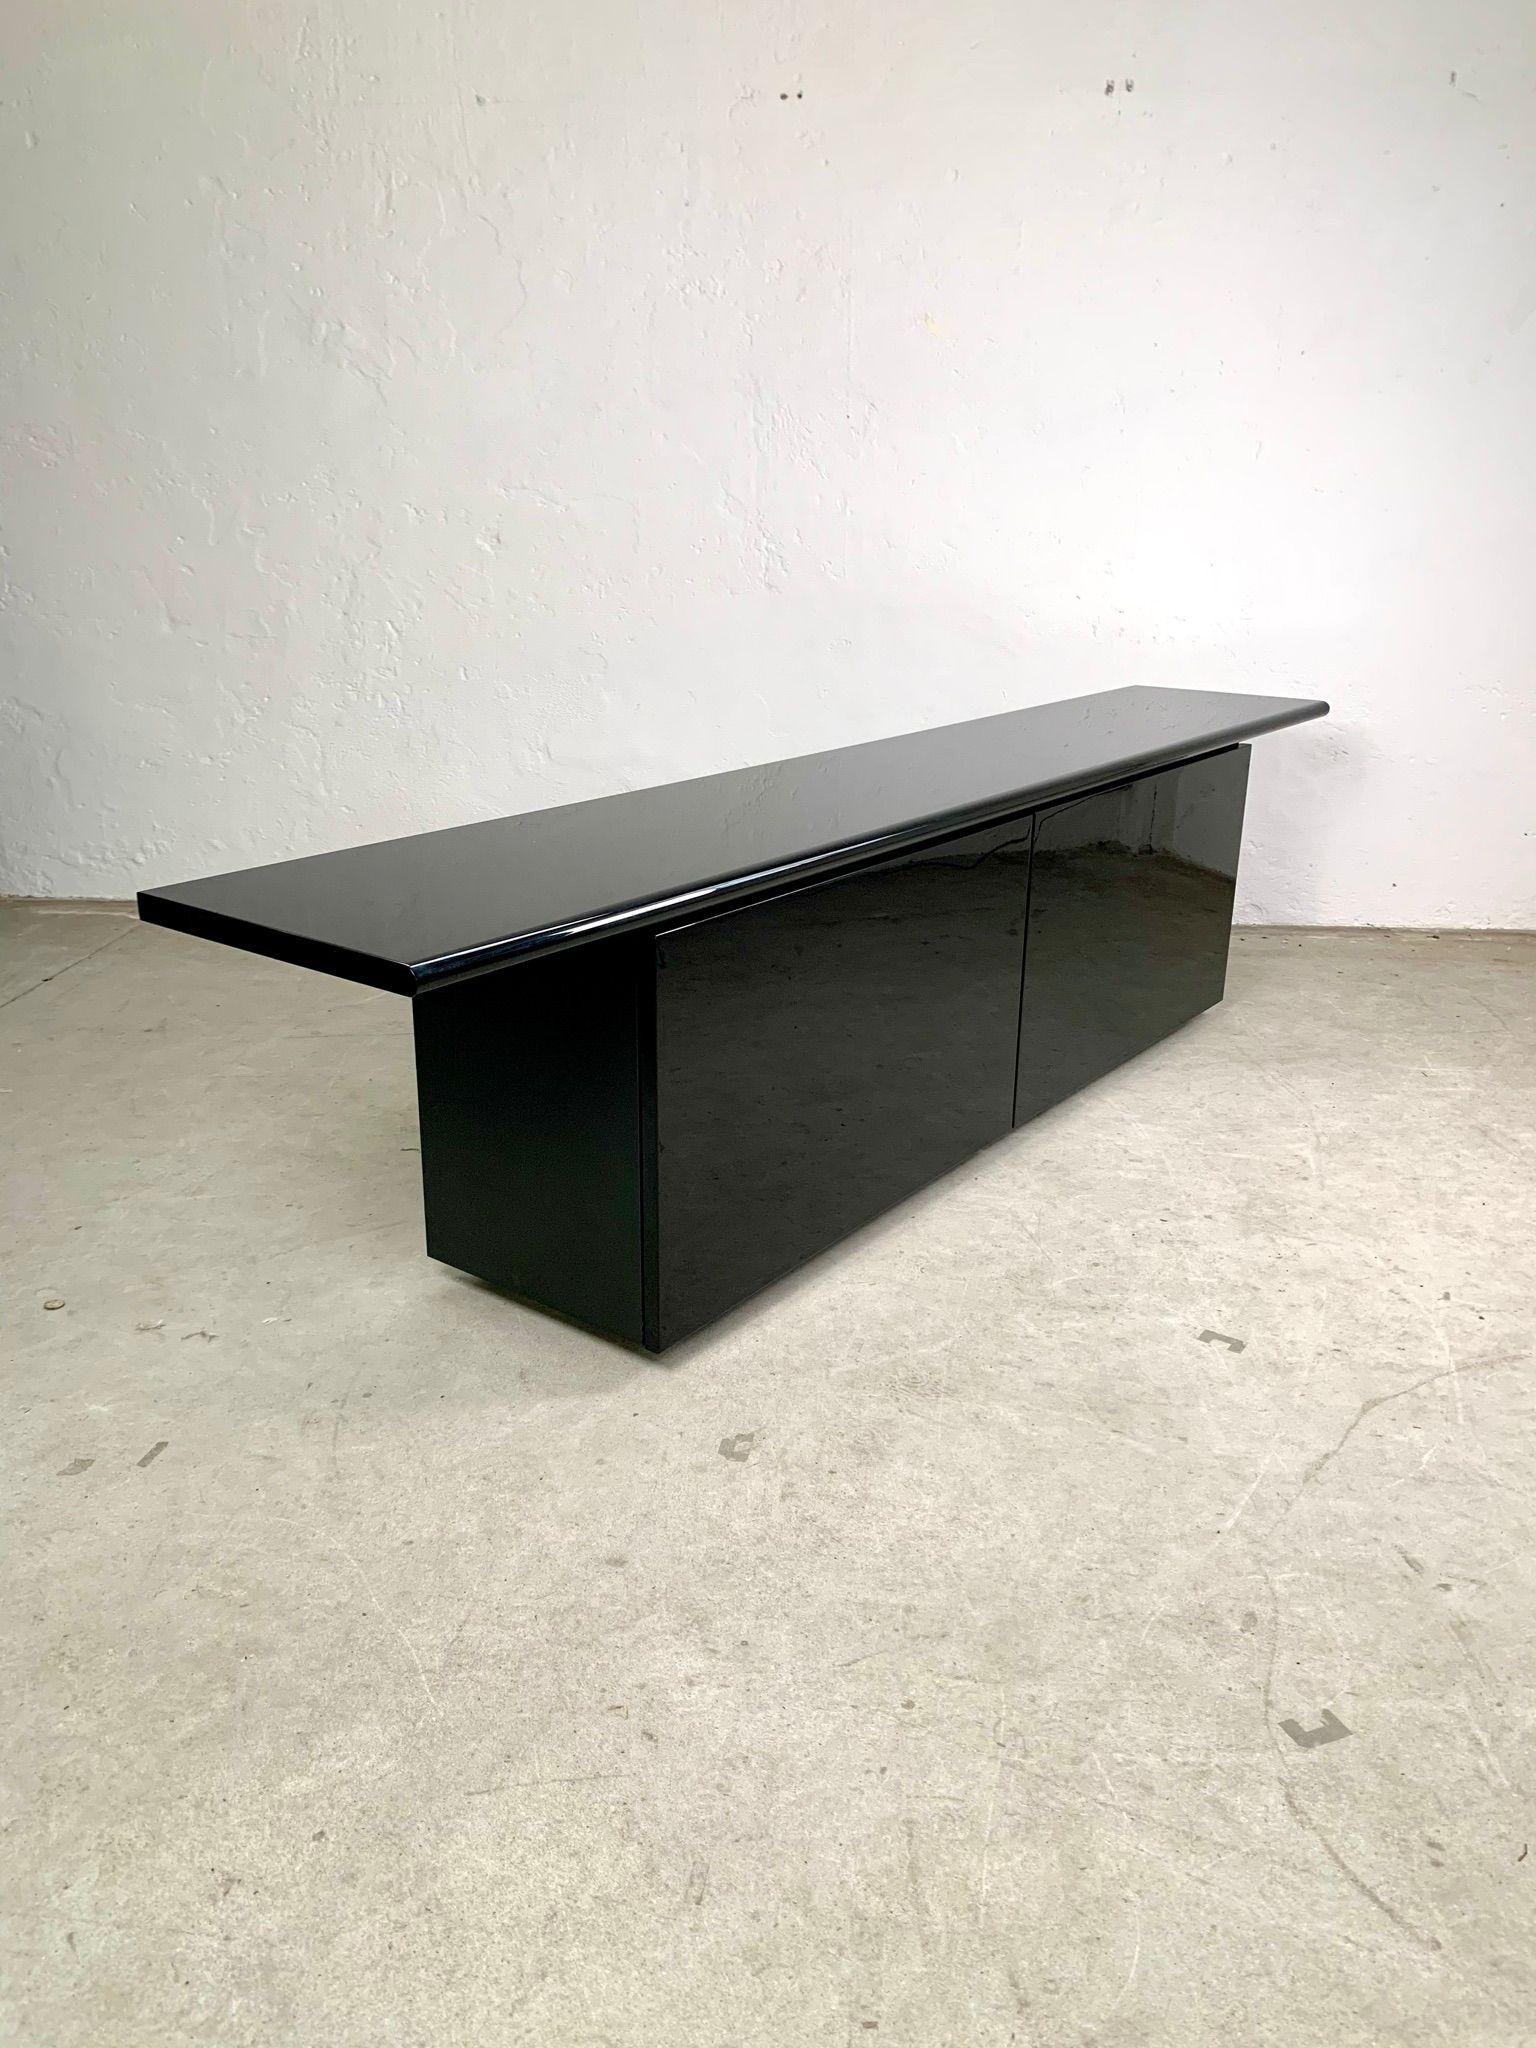 Metal Stoppino and Acerbis, Black lacquered two-door storage sideboard, 1977